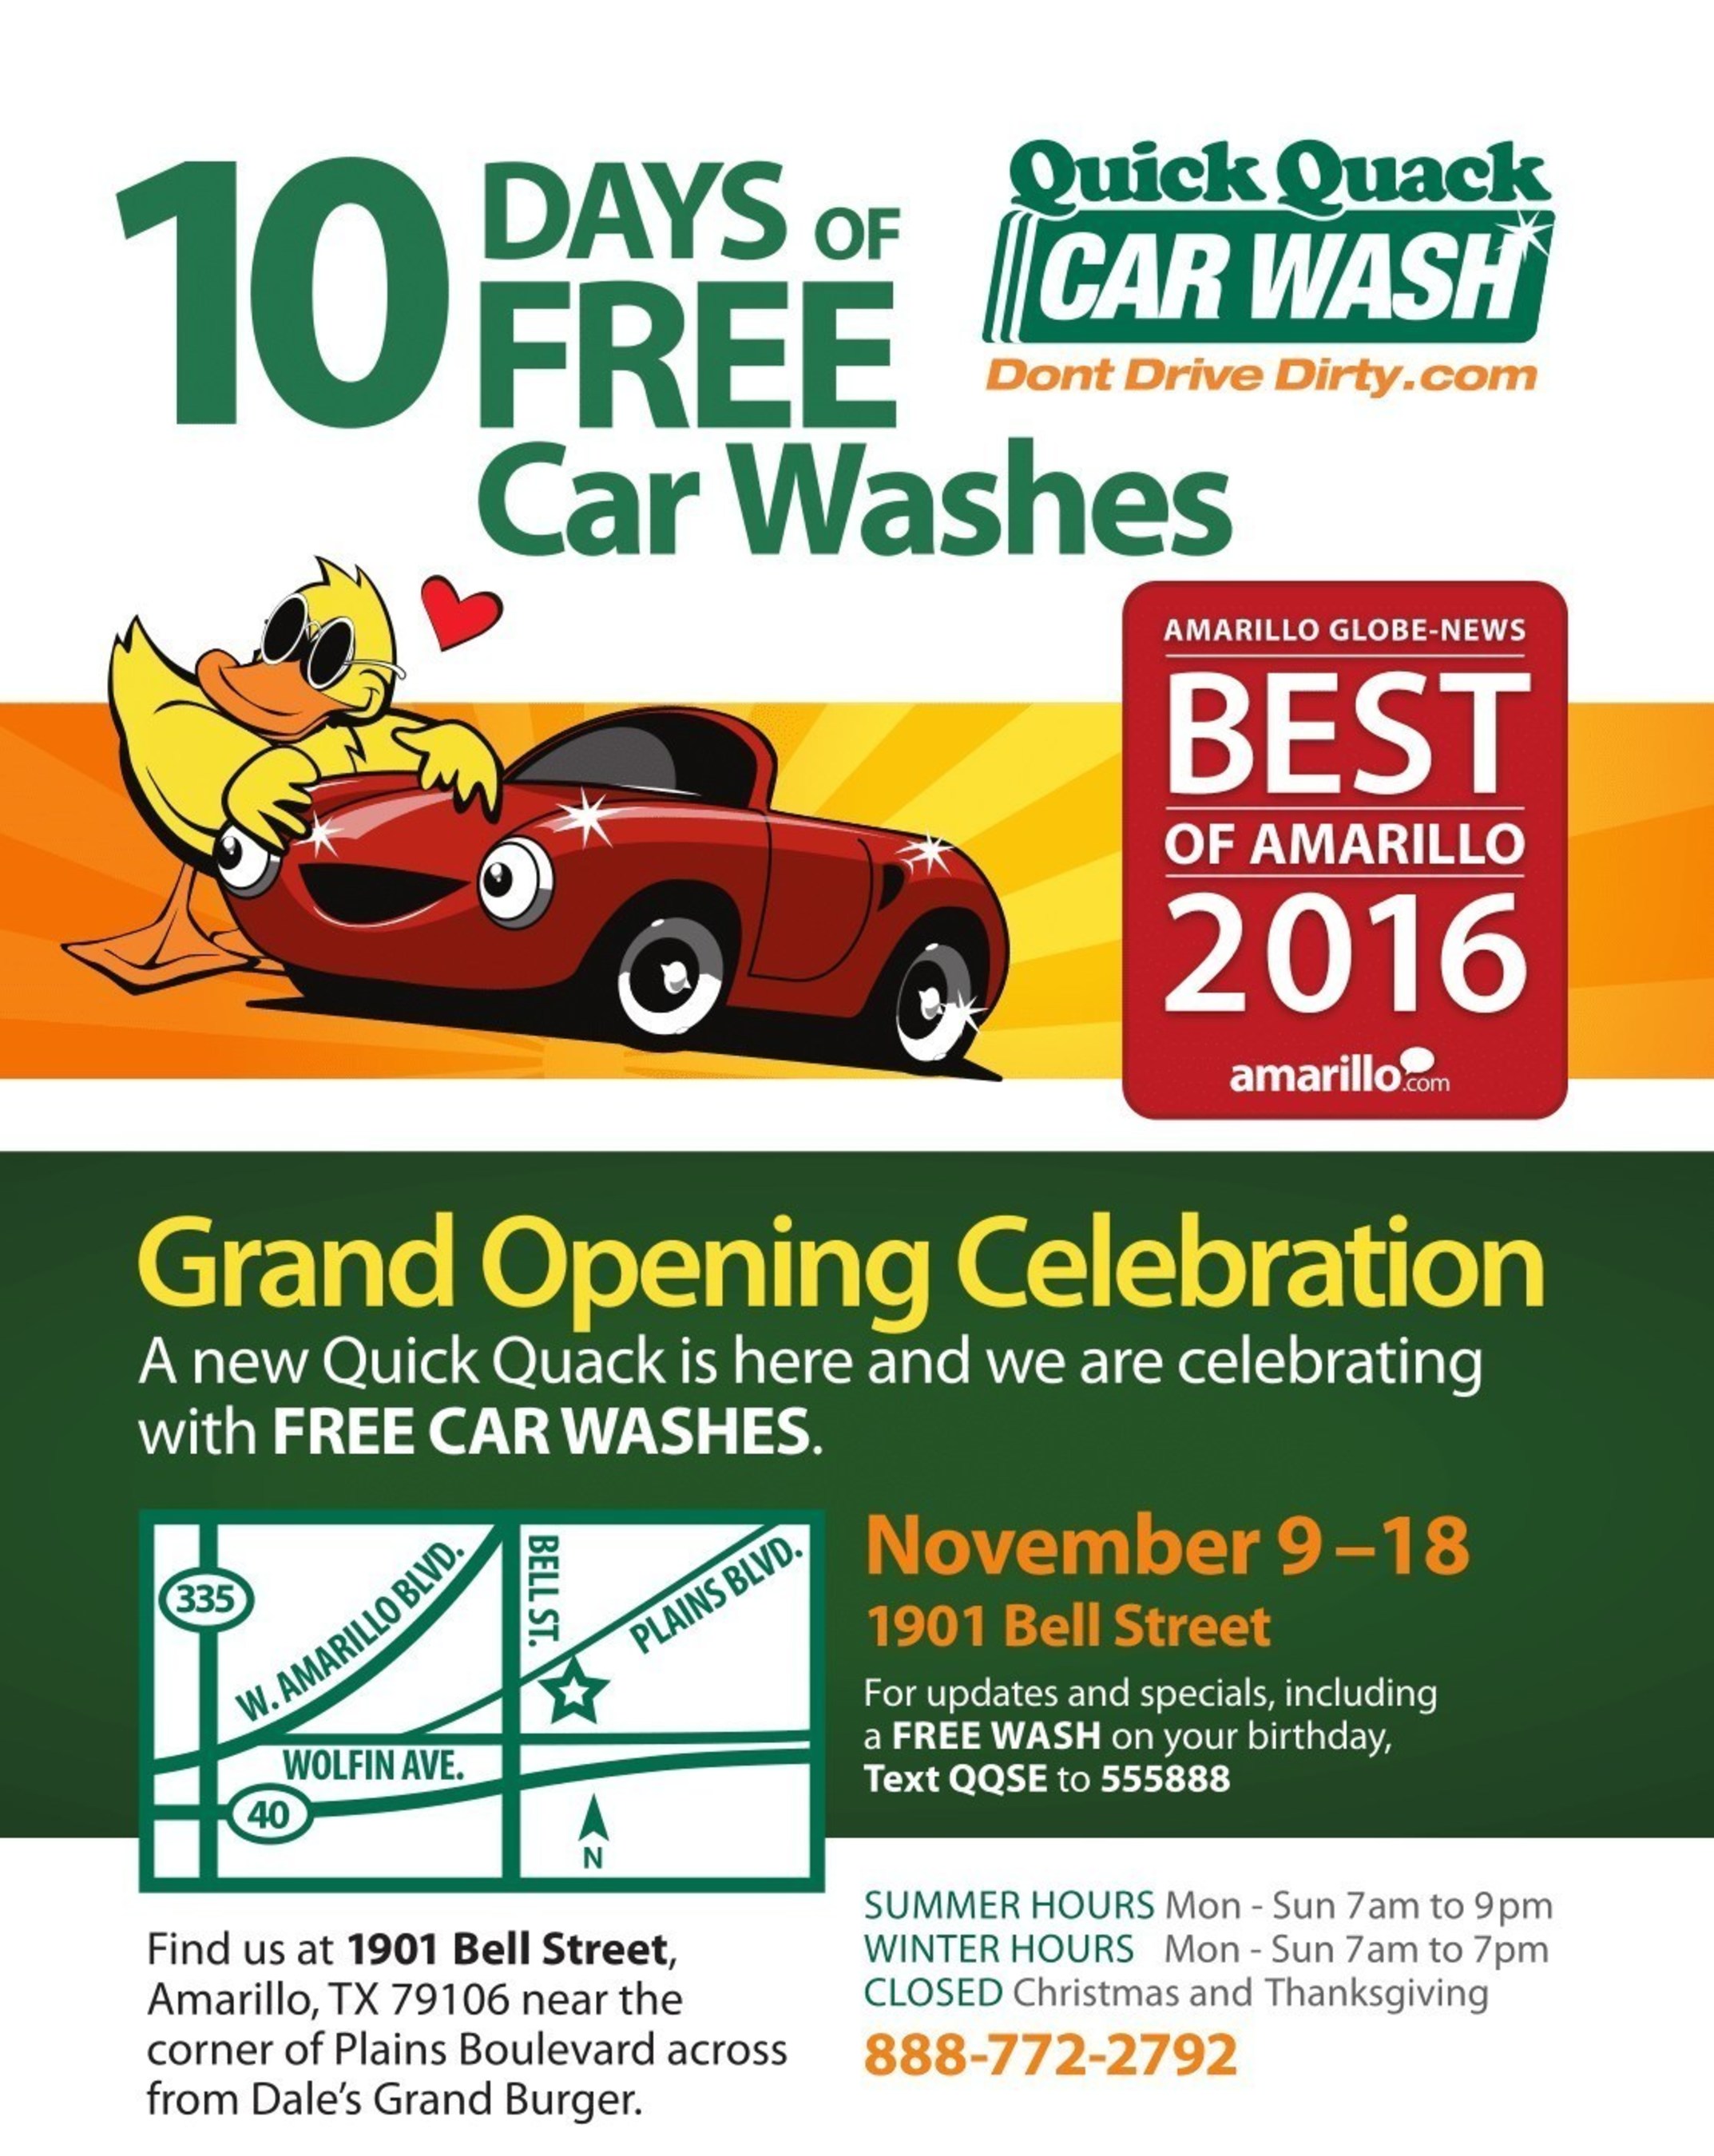 Grand Opening: 10 Days of Free Car Washes begin on Nov. 9 at 1901 Bell St.